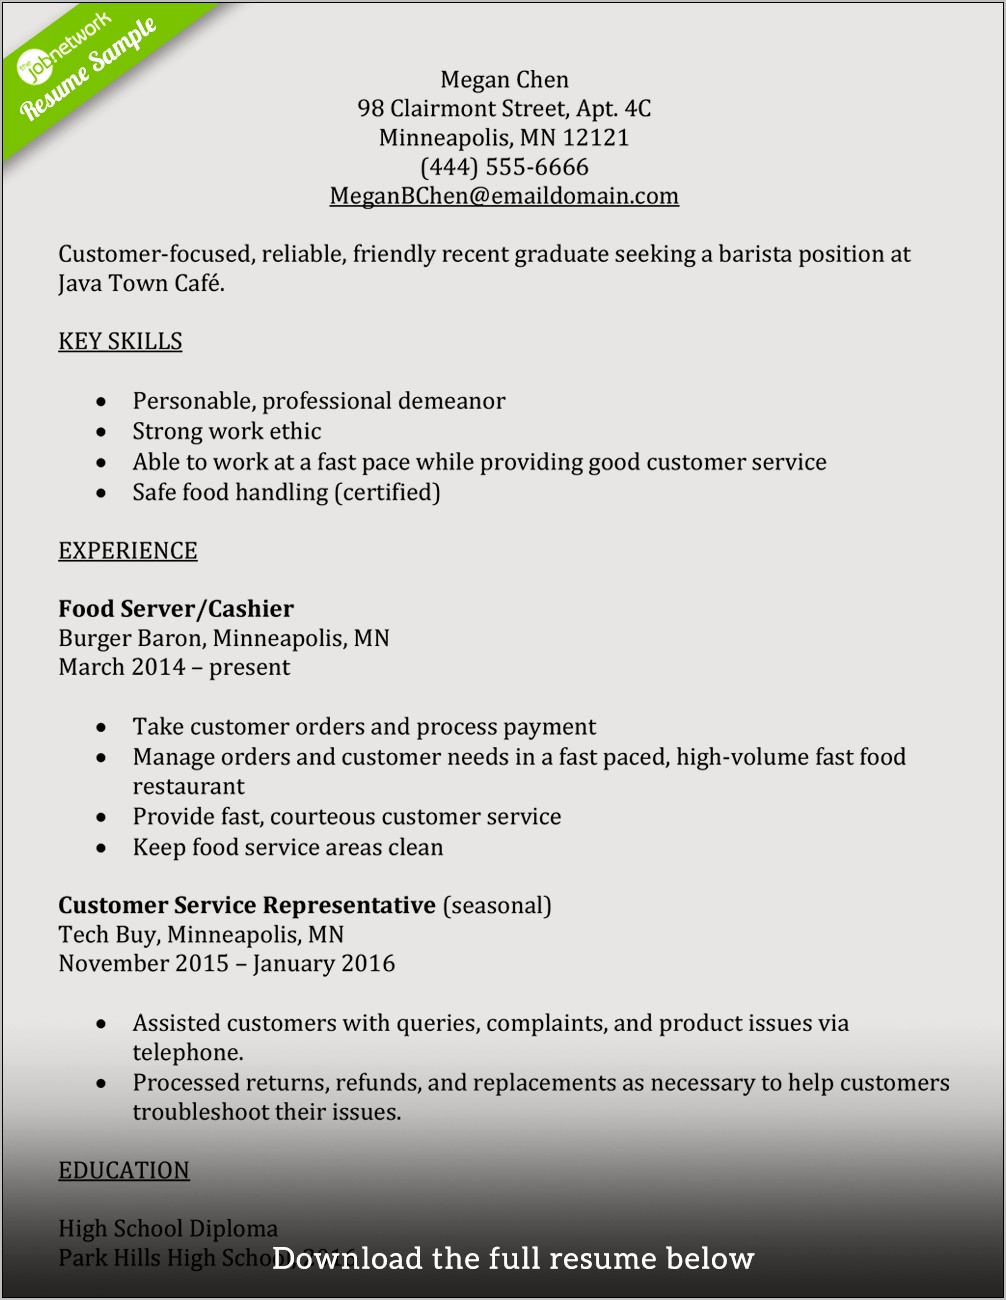 Resume Highlights And Accomplishments And Experience